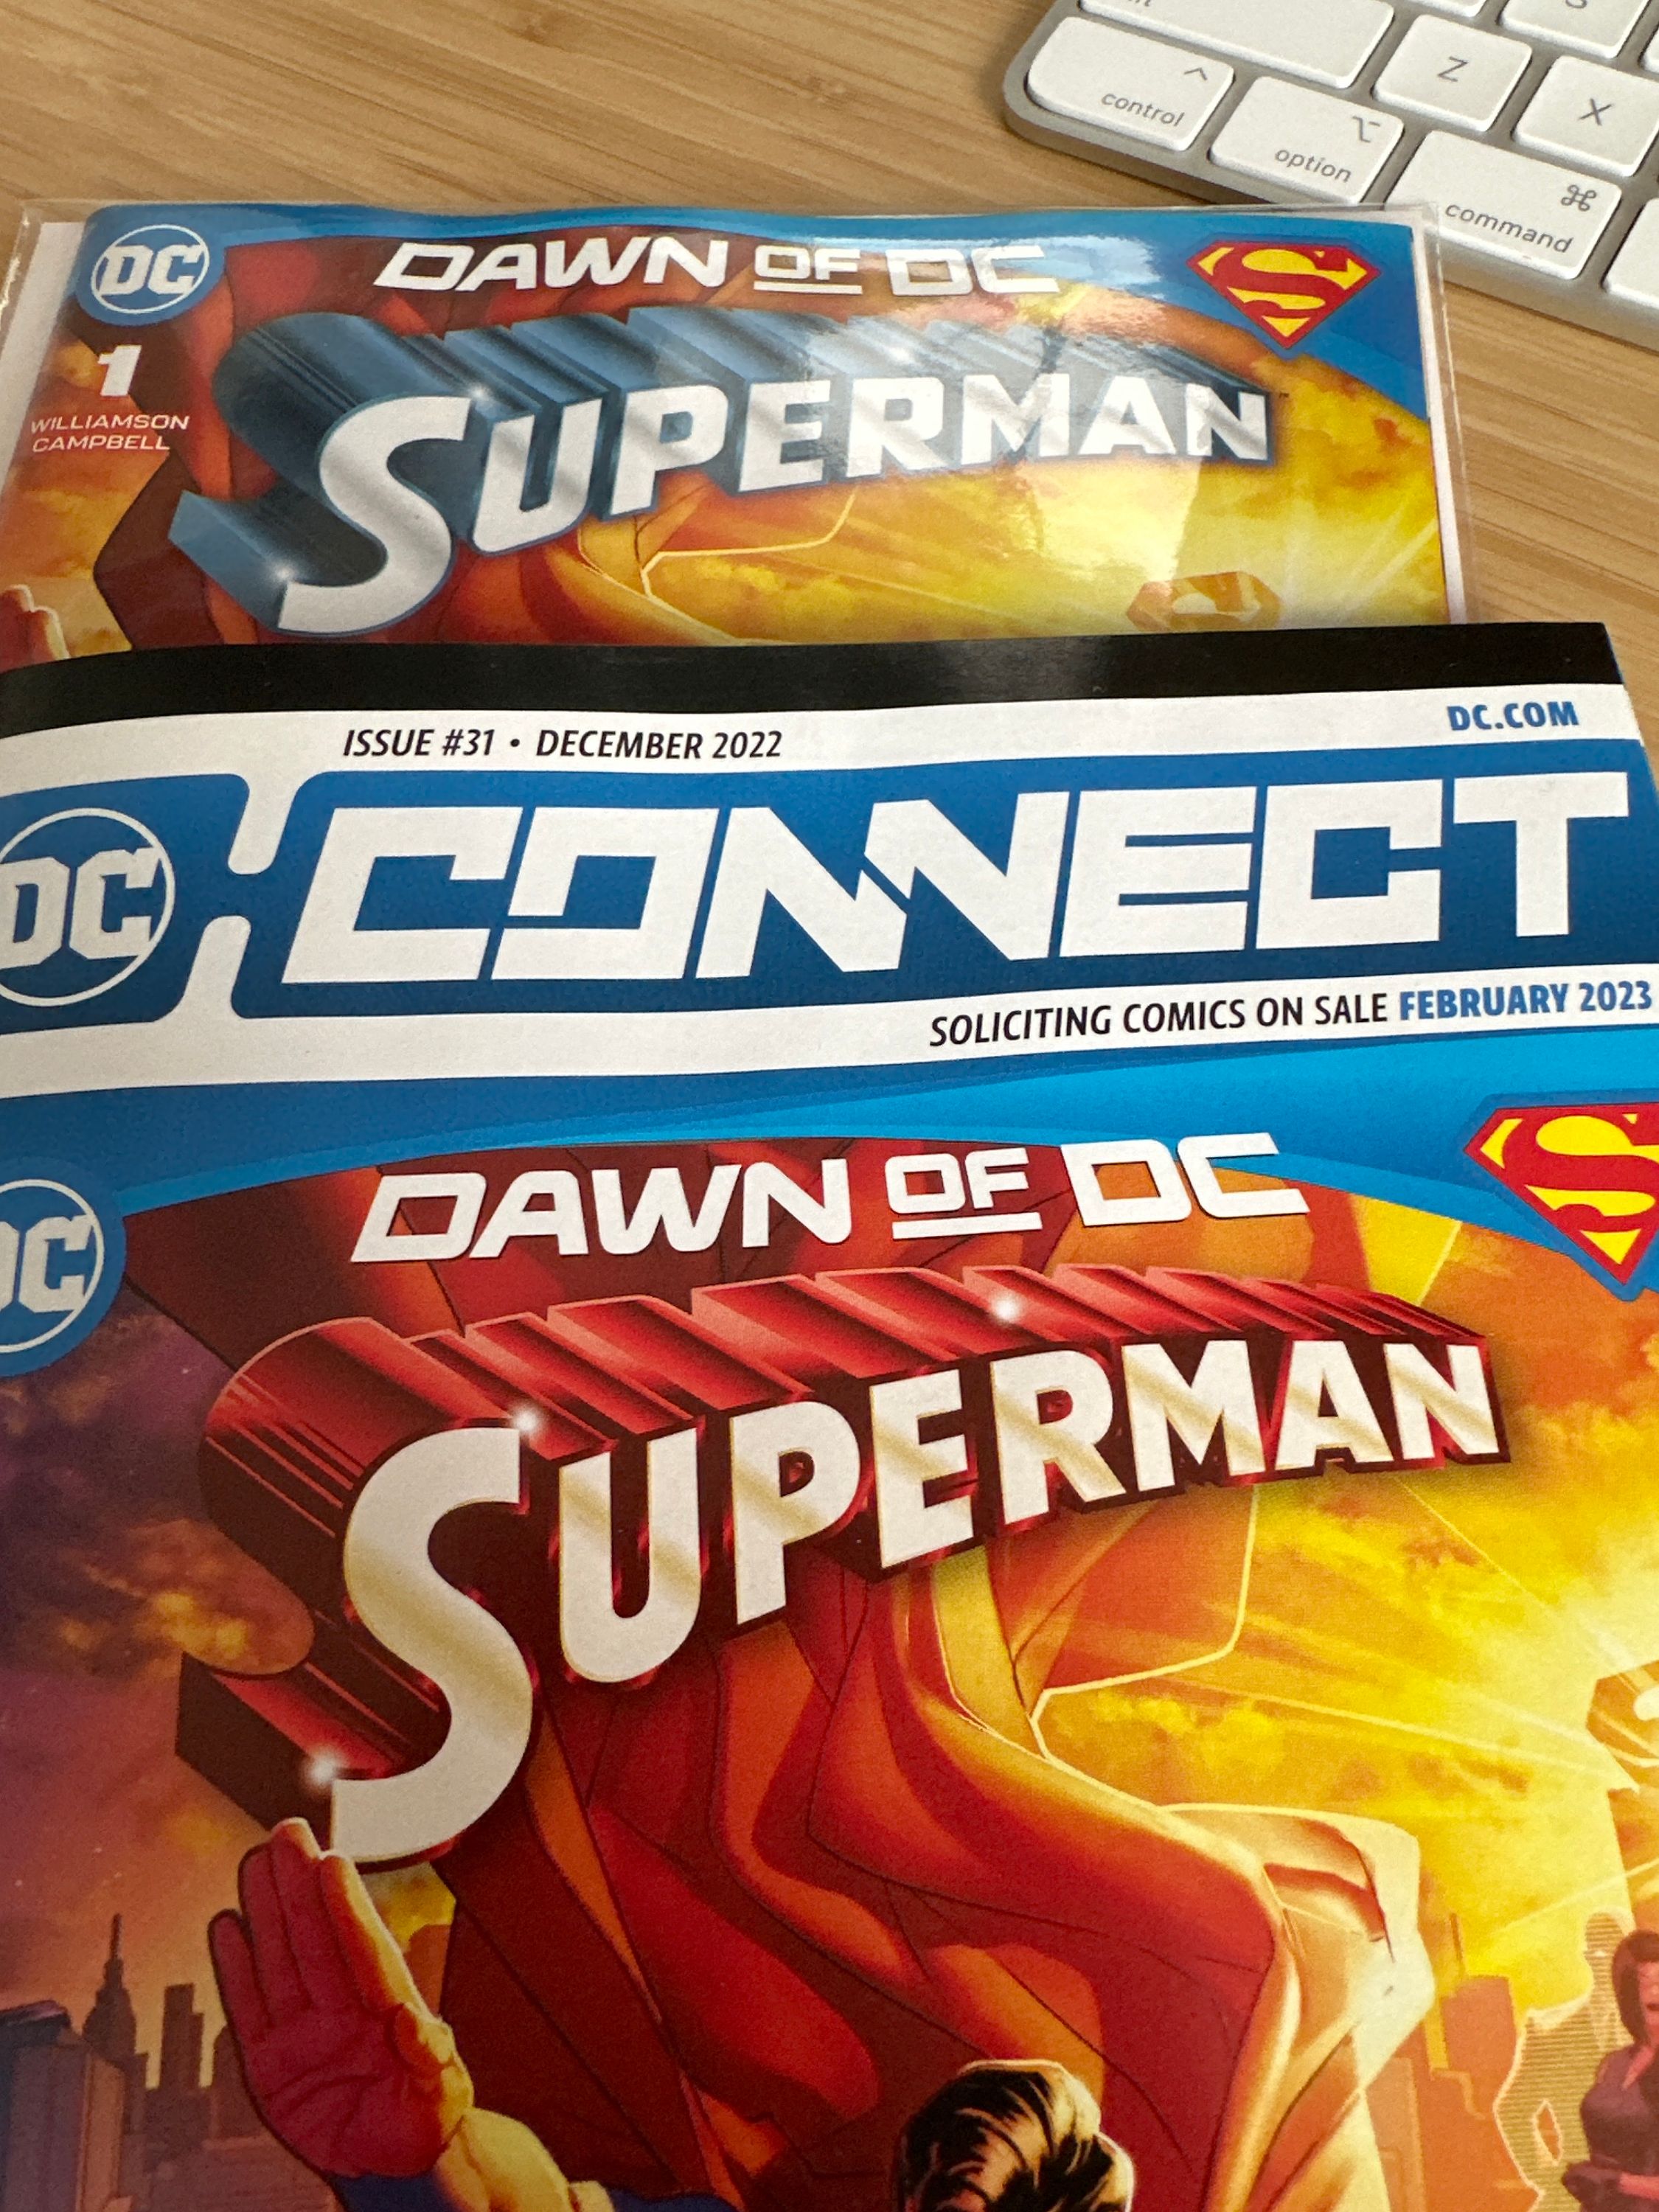 the latest Superman #1 along with the DC connect issue promoting it, each with different Superman logos.